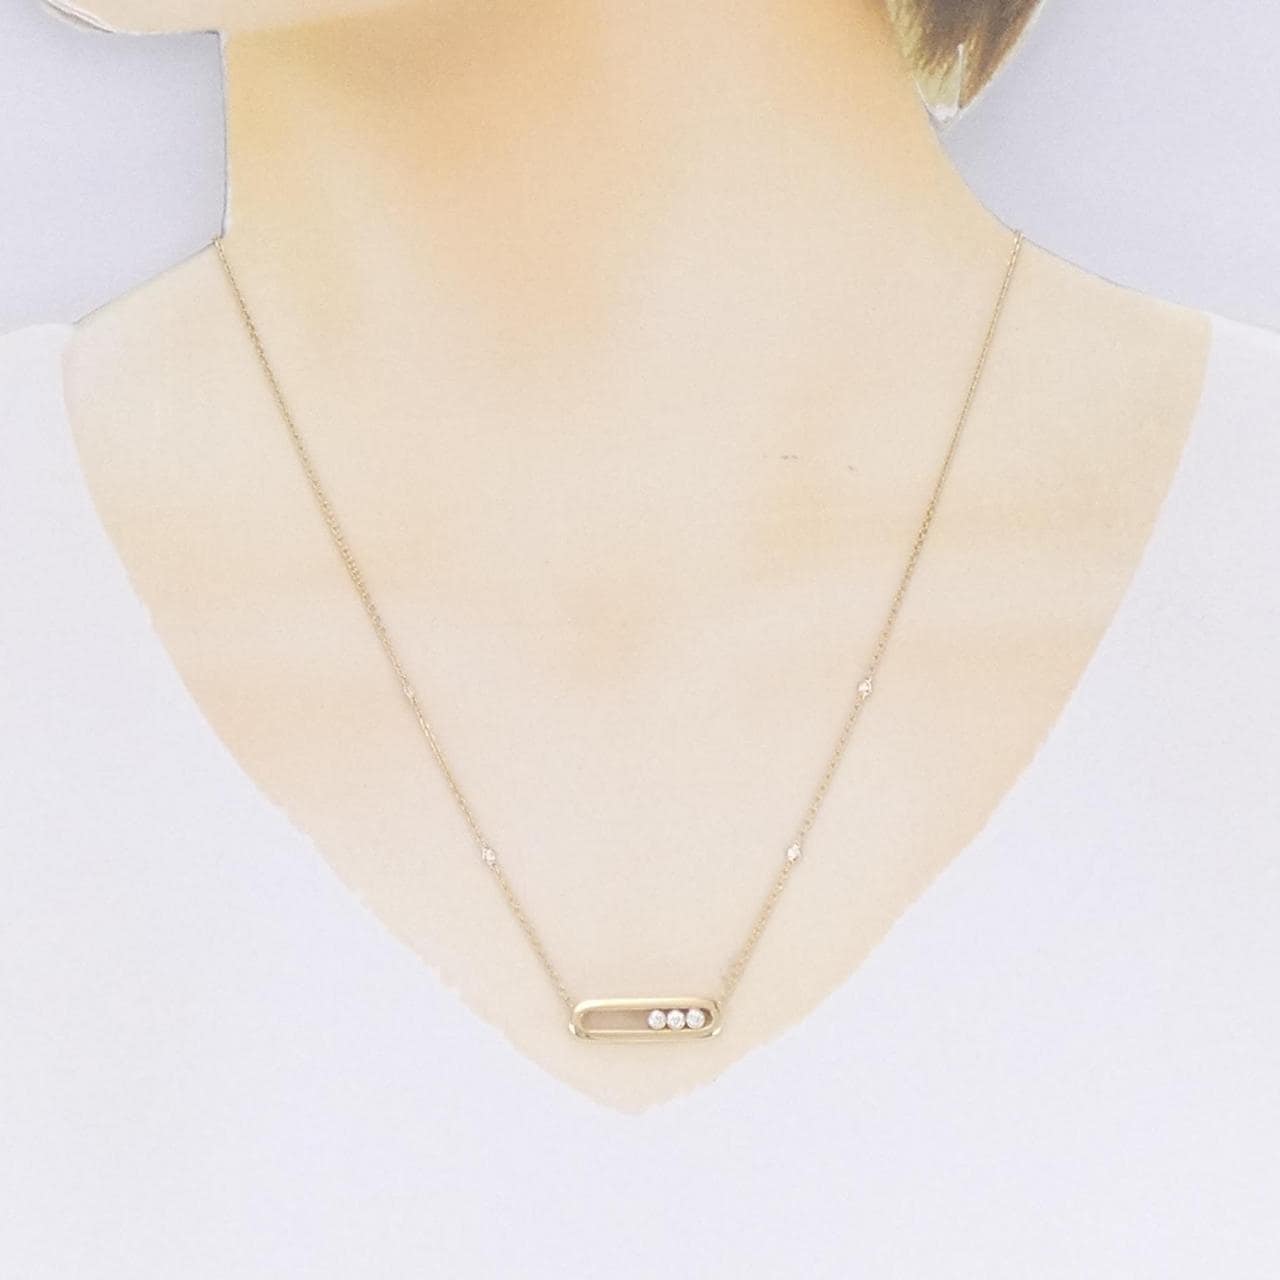 [BRAND NEW] Messika Baby Move Necklace